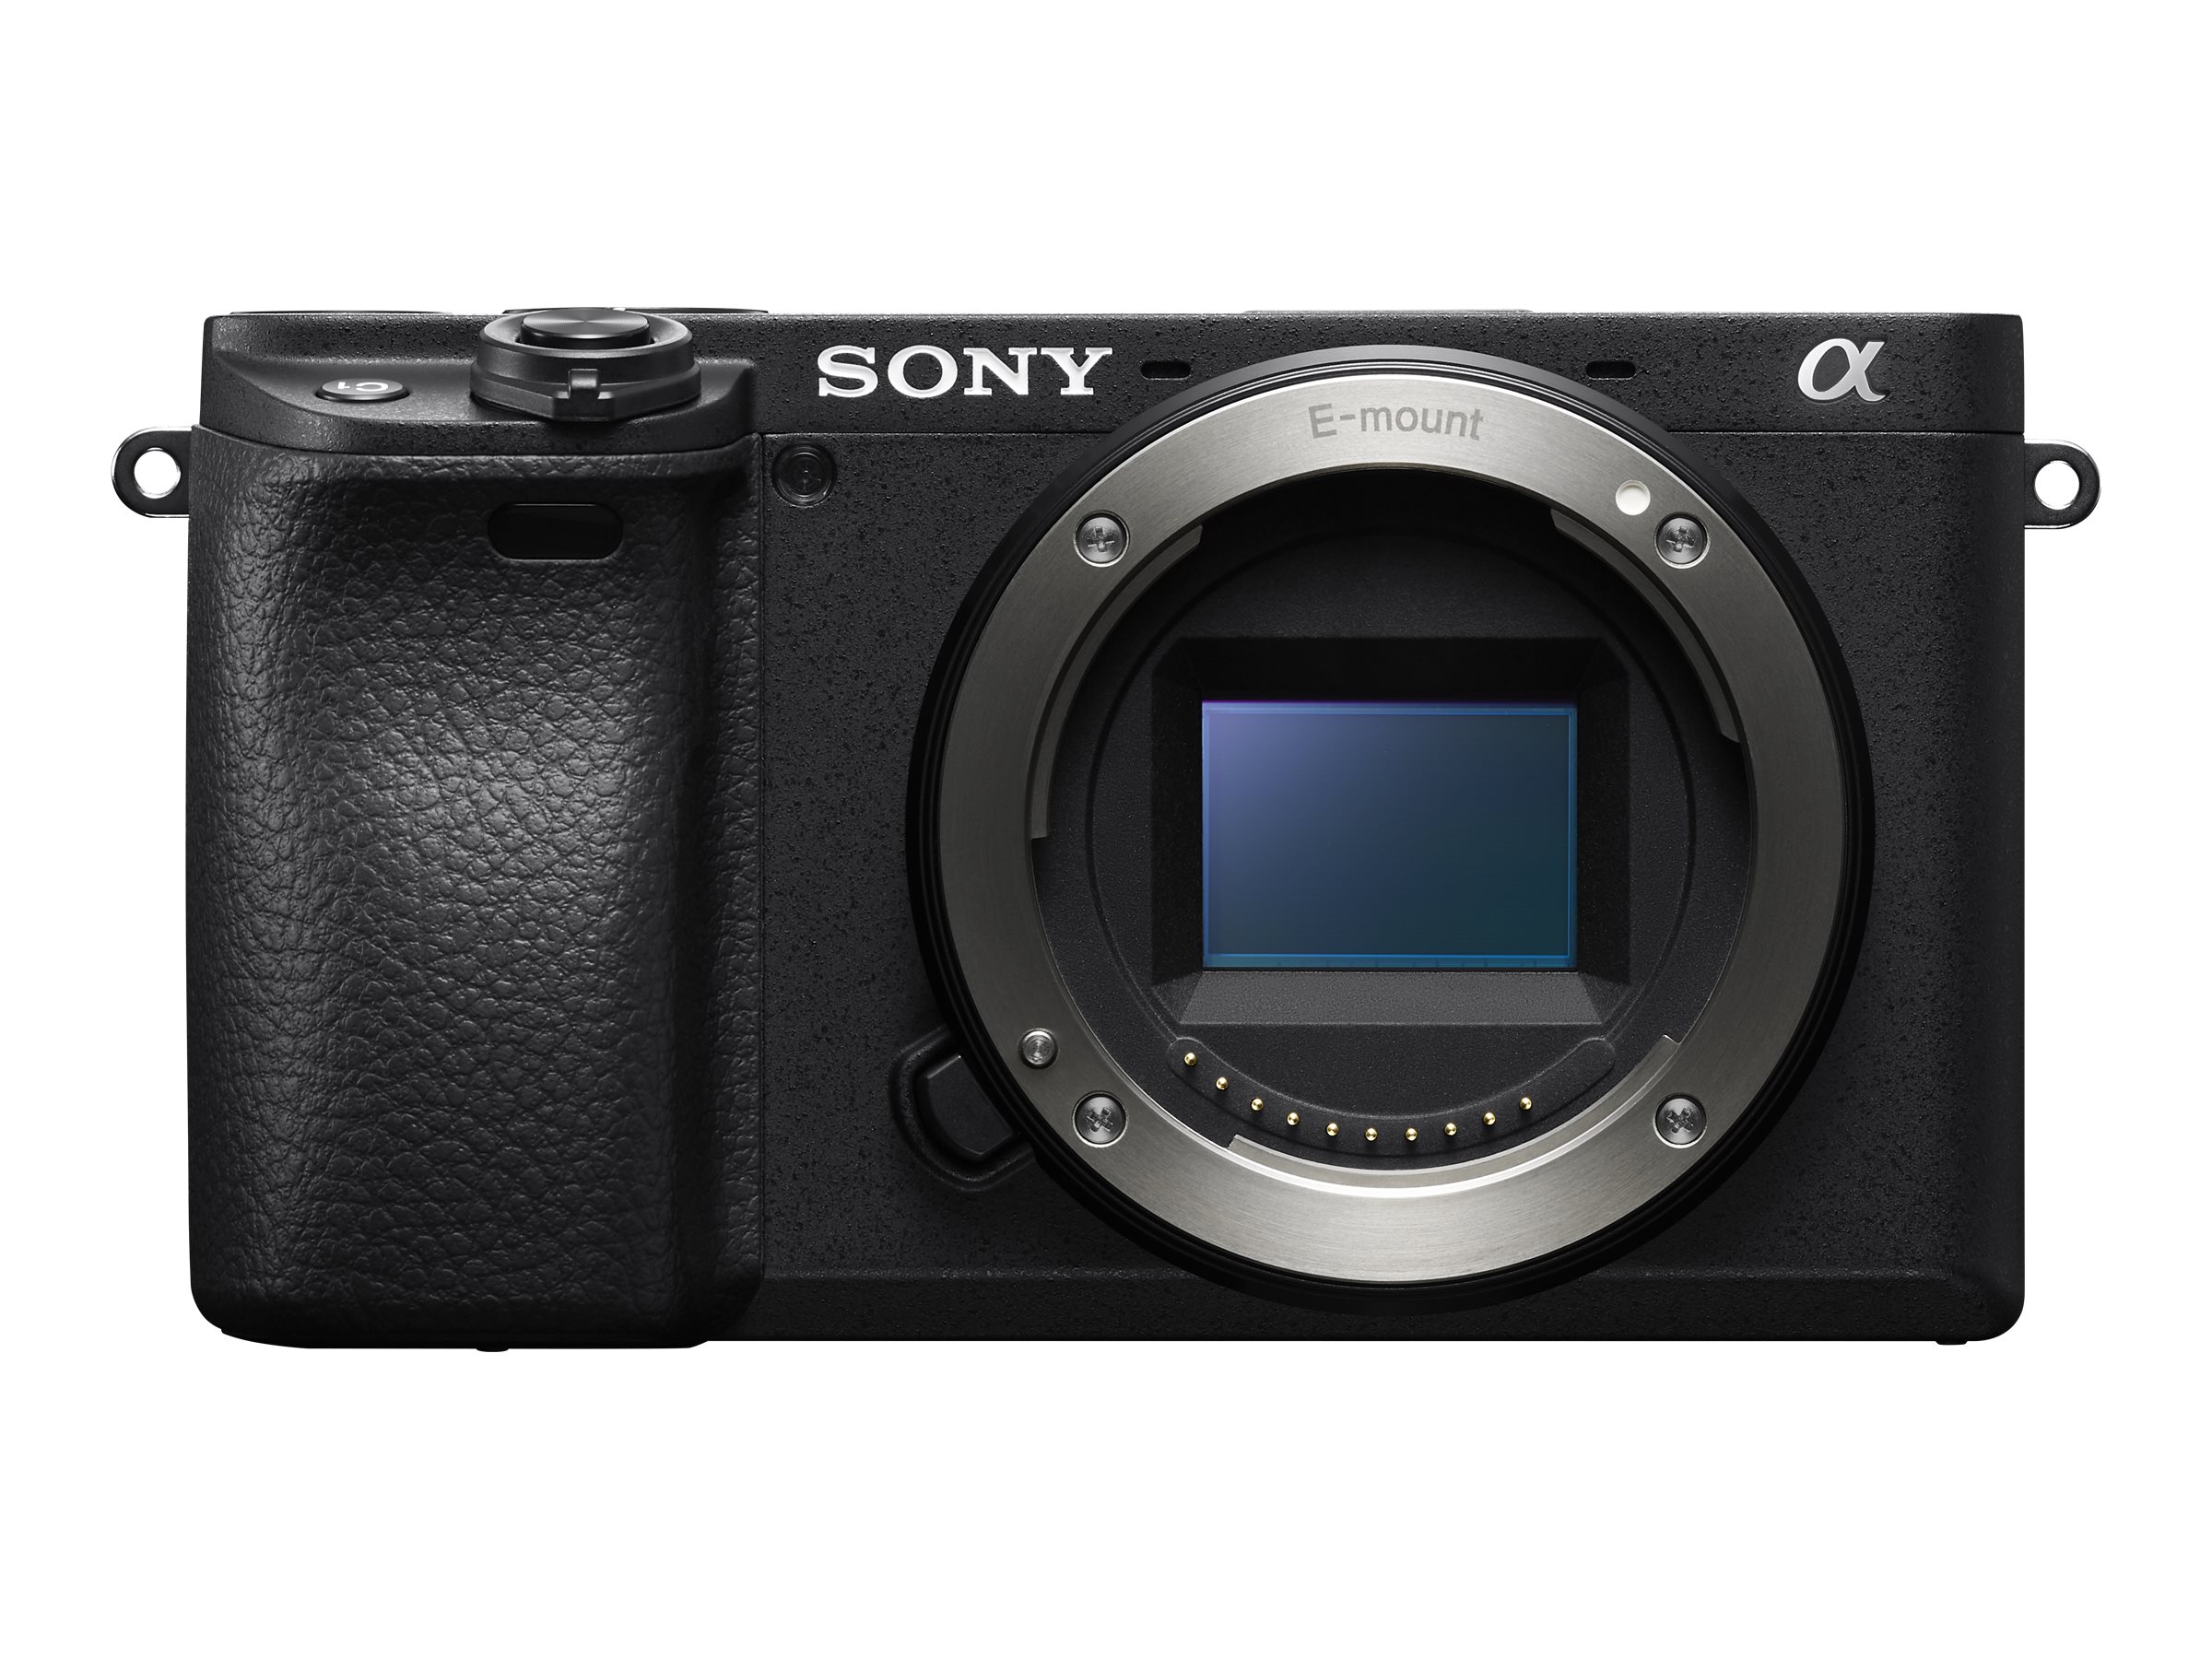 Sony Alpha6400 ILCE-6400 - full specs, details and review